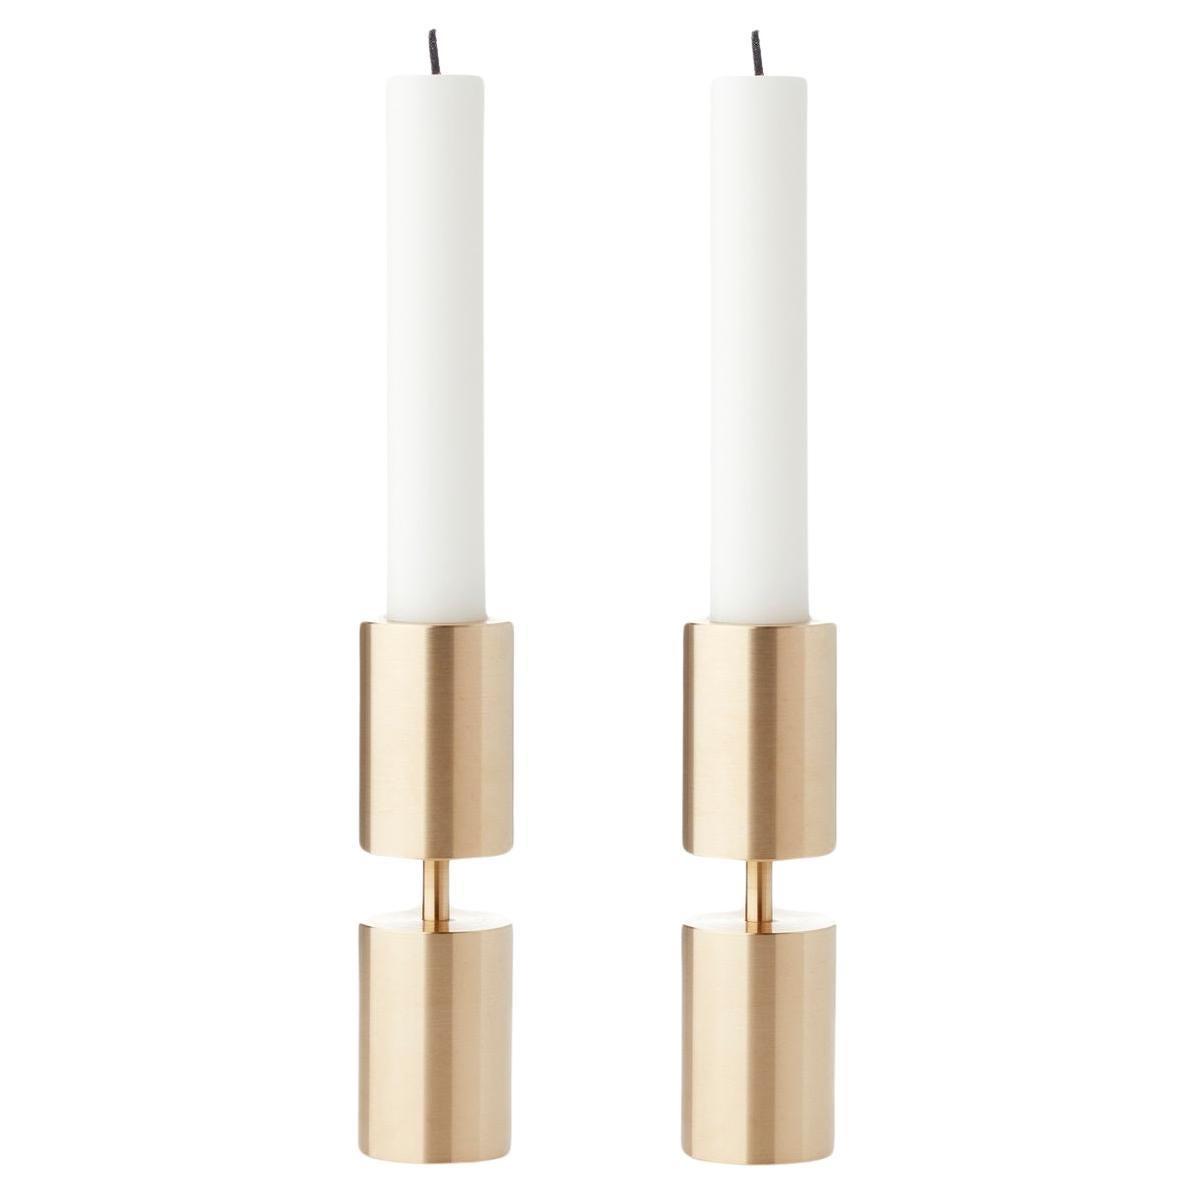 Set of 2 Solid Brass Candleholder by Applicata